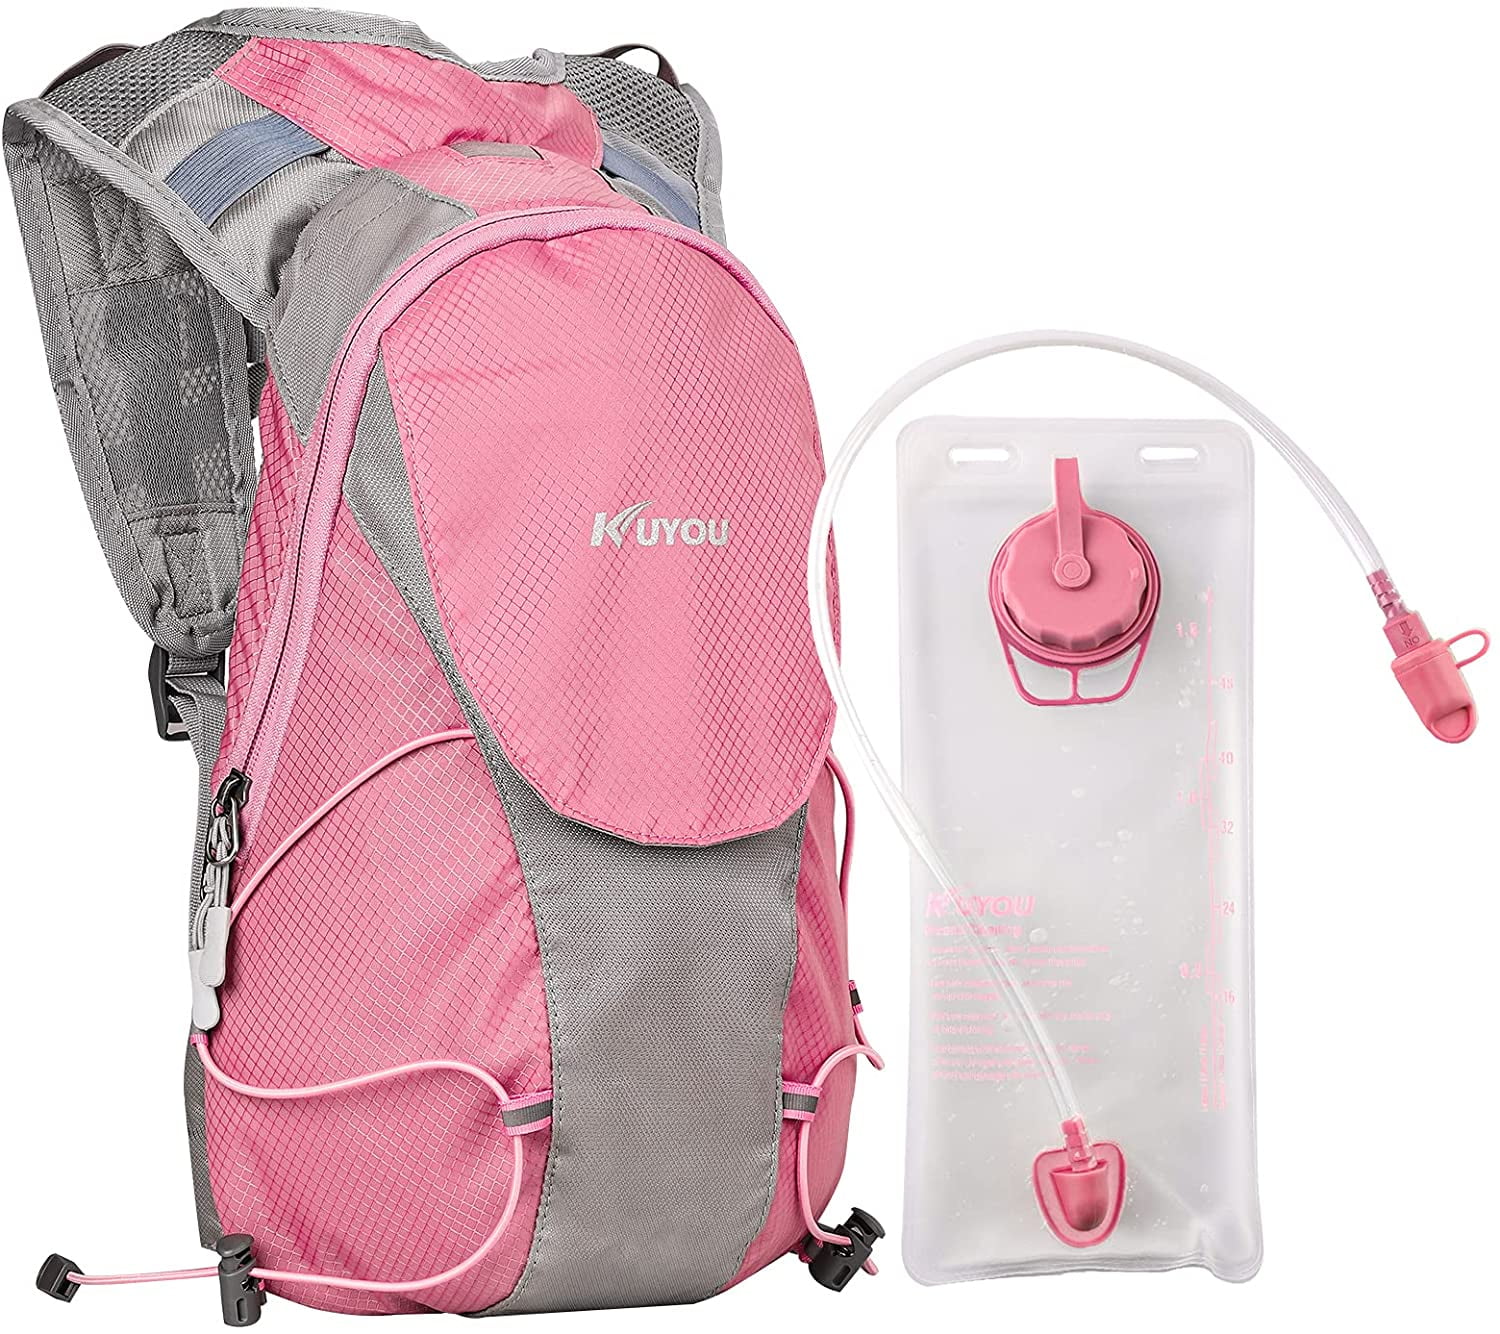 1.5 Litre Hydration Pack/Backpack Bag With Water Bladder For Running/Cycling 